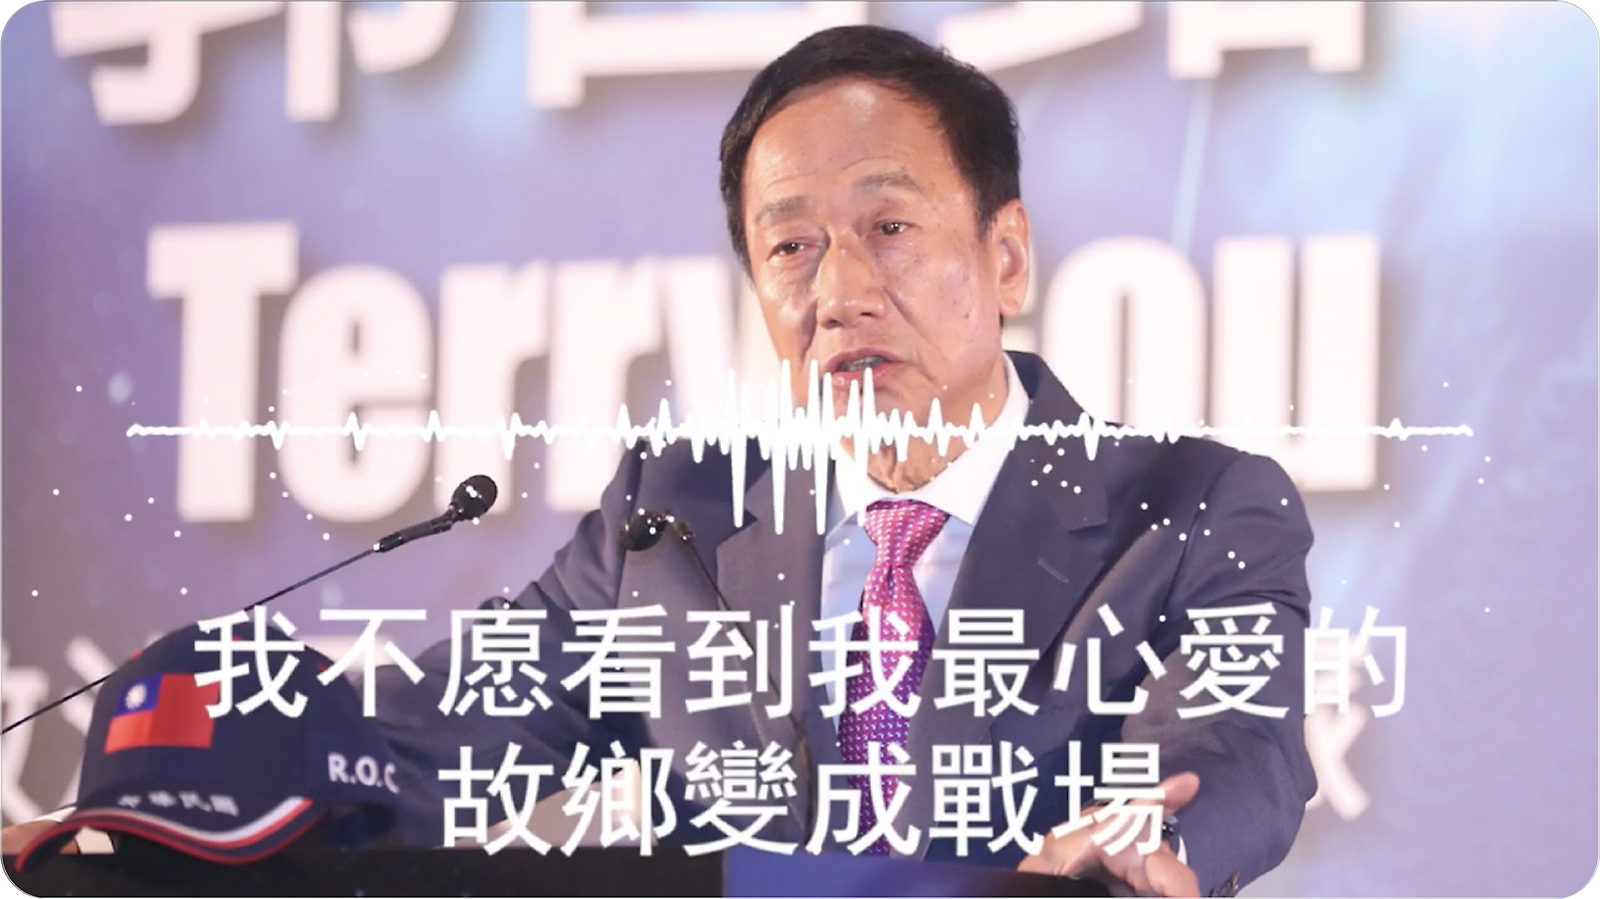 A man in a suit speaking at a podium with chinese text and a graphic of an audio waveform in the foreground.